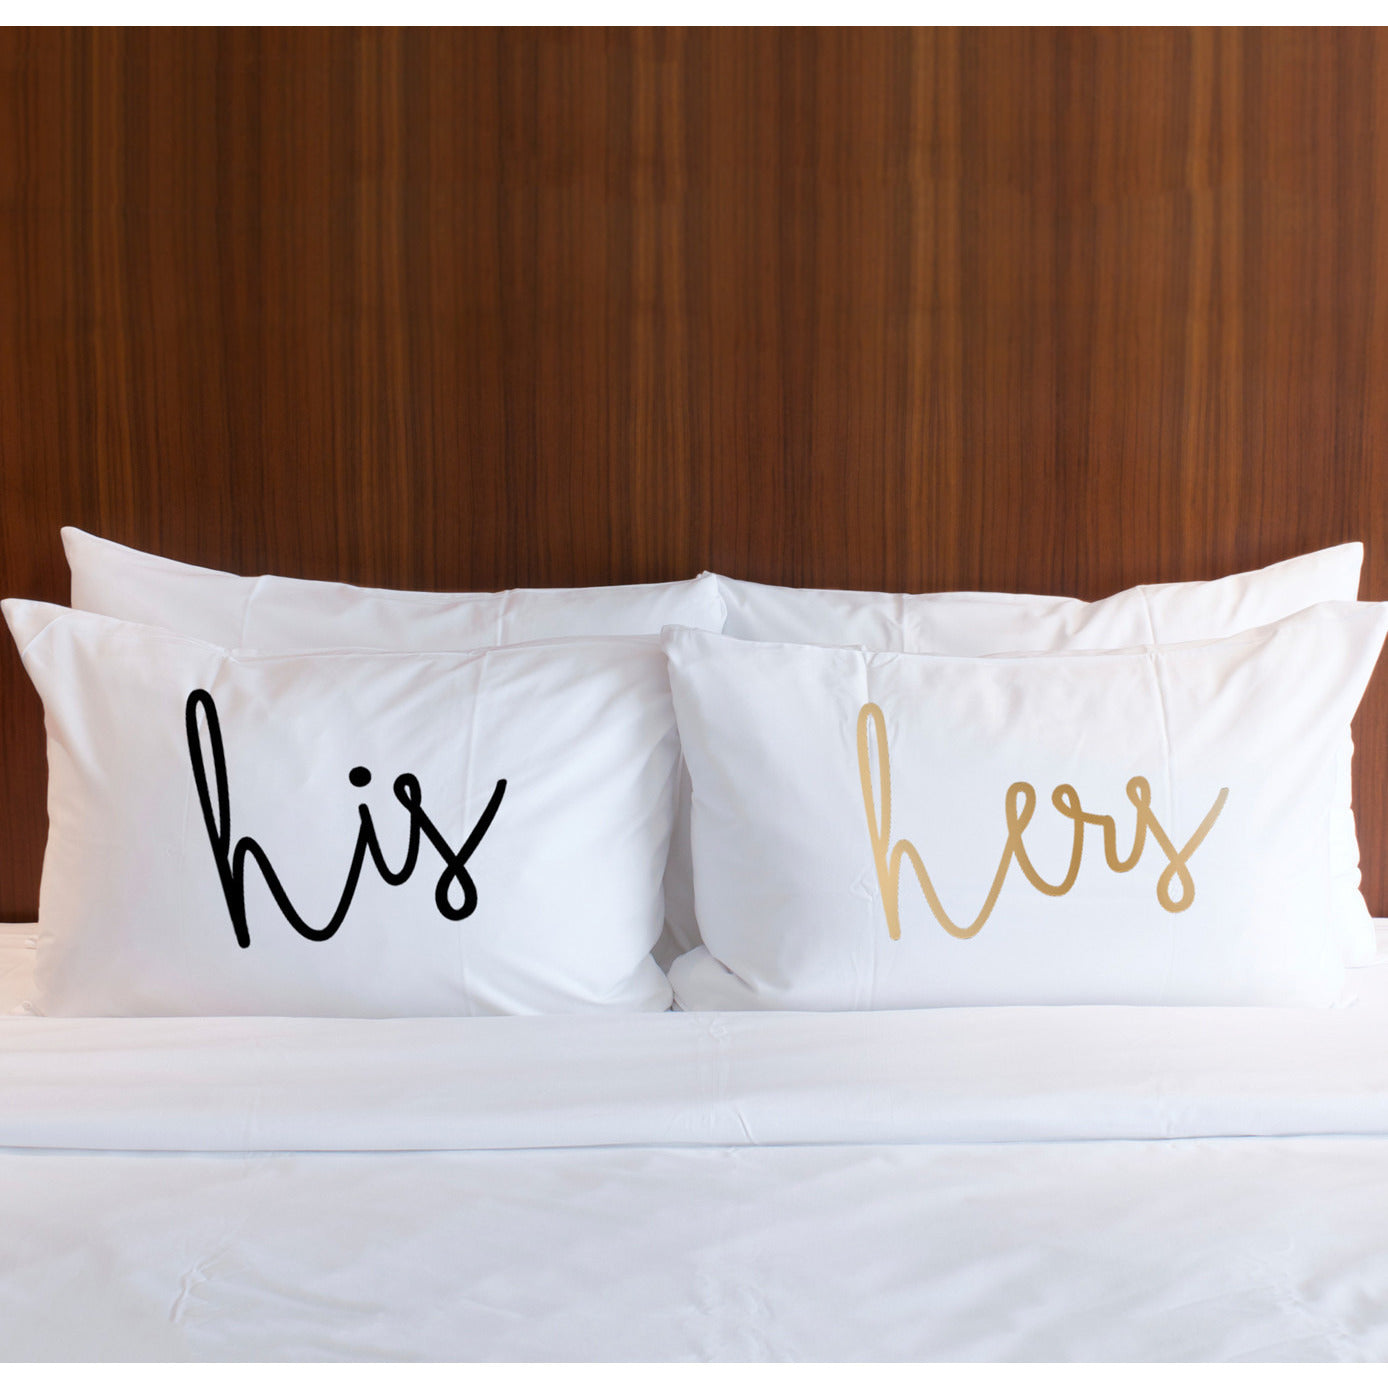 "his, hers" Pillowcases Wedding Gift for Couple - Wedding Decor Gifts